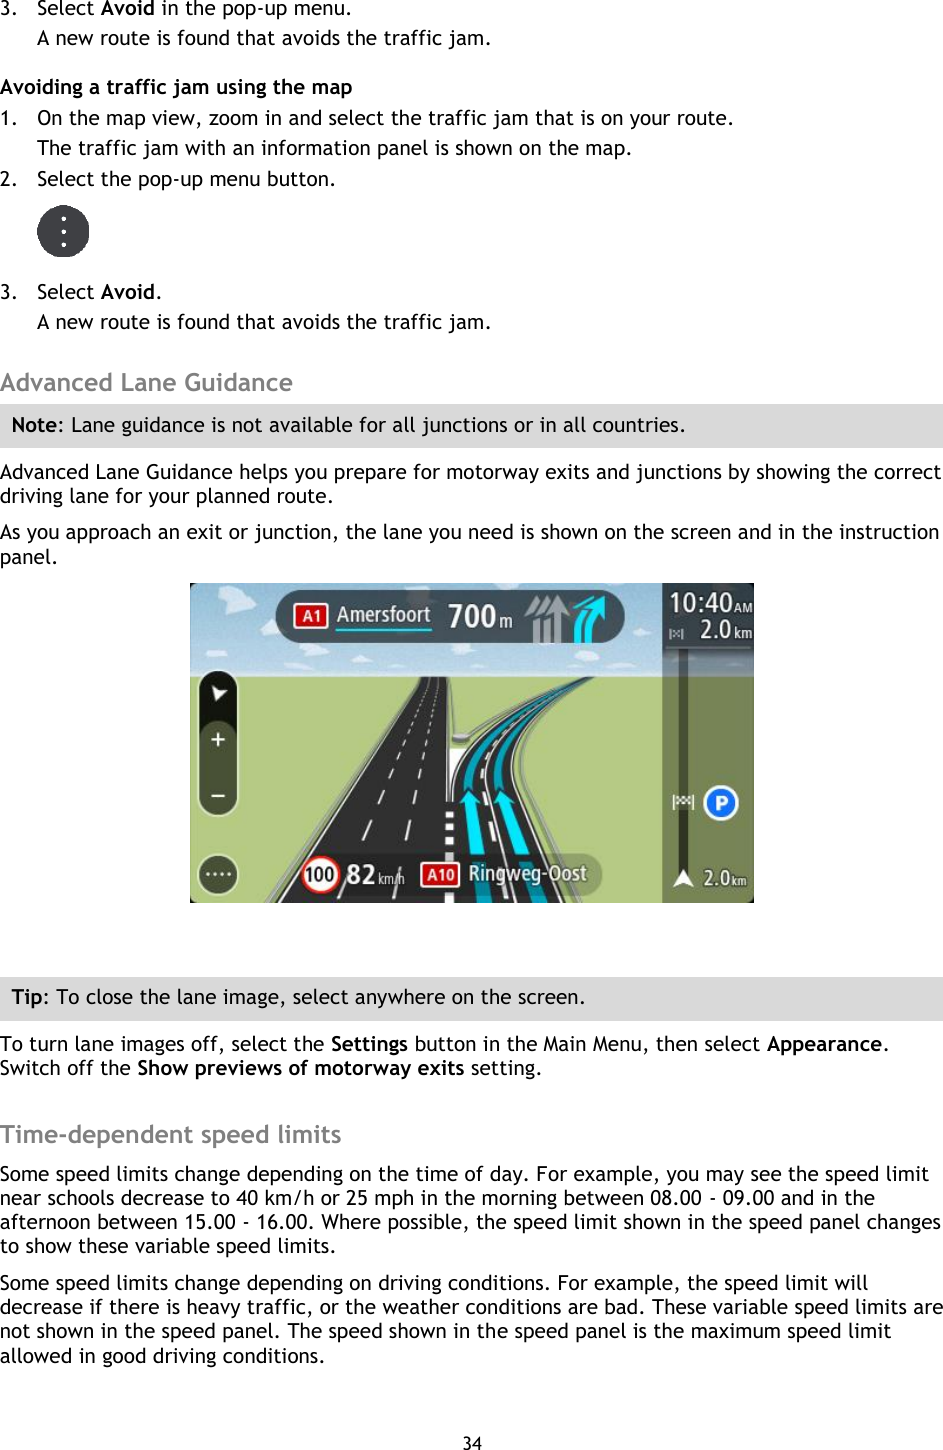 34    3. Select Avoid in the pop-up menu. A new route is found that avoids the traffic jam. Avoiding a traffic jam using the map 1. On the map view, zoom in and select the traffic jam that is on your route. The traffic jam with an information panel is shown on the map. 2. Select the pop-up menu button.  3. Select Avoid. A new route is found that avoids the traffic jam.  Advanced Lane Guidance Note: Lane guidance is not available for all junctions or in all countries. Advanced Lane Guidance helps you prepare for motorway exits and junctions by showing the correct driving lane for your planned route. As you approach an exit or junction, the lane you need is shown on the screen and in the instruction panel.   Tip: To close the lane image, select anywhere on the screen. To turn lane images off, select the Settings button in the Main Menu, then select Appearance. Switch off the Show previews of motorway exits setting.  Time-dependent speed limits Some speed limits change depending on the time of day. For example, you may see the speed limit near schools decrease to 40 km/h or 25 mph in the morning between 08.00 - 09.00 and in the afternoon between 15.00 - 16.00. Where possible, the speed limit shown in the speed panel changes to show these variable speed limits. Some speed limits change depending on driving conditions. For example, the speed limit will decrease if there is heavy traffic, or the weather conditions are bad. These variable speed limits are not shown in the speed panel. The speed shown in the speed panel is the maximum speed limit allowed in good driving conditions. 